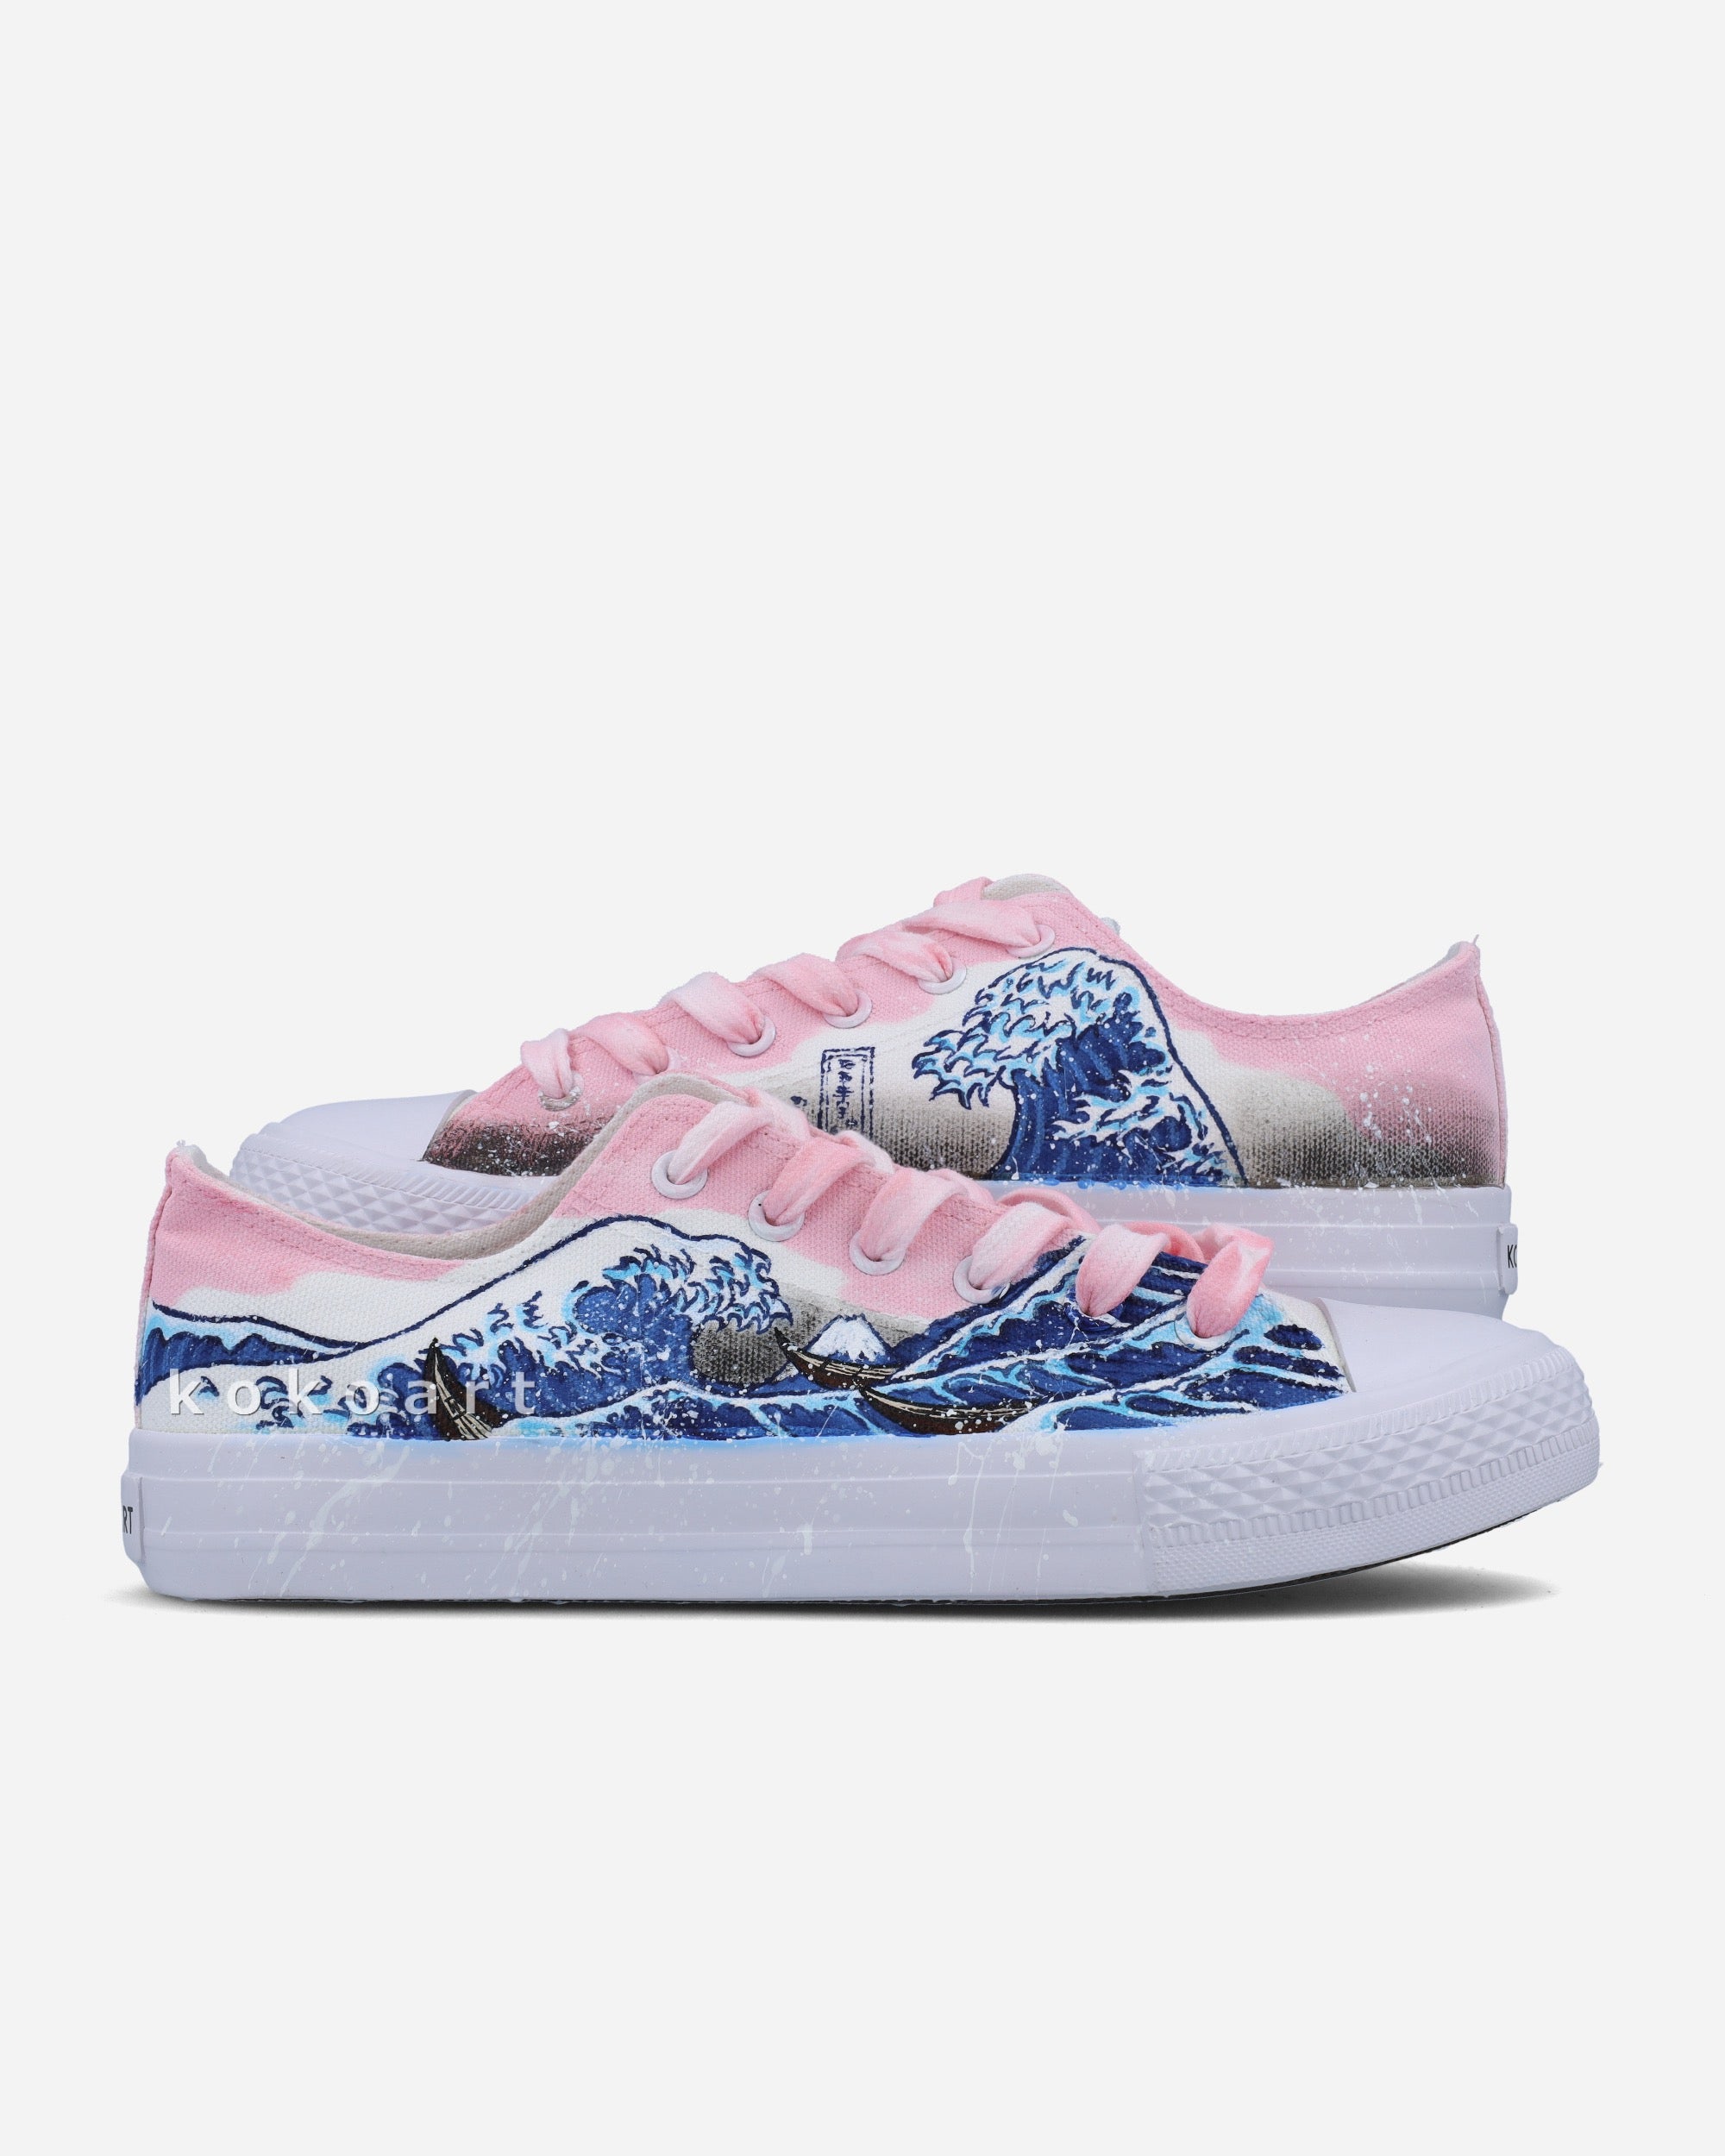 Waves Pink Hand Painted Shoes